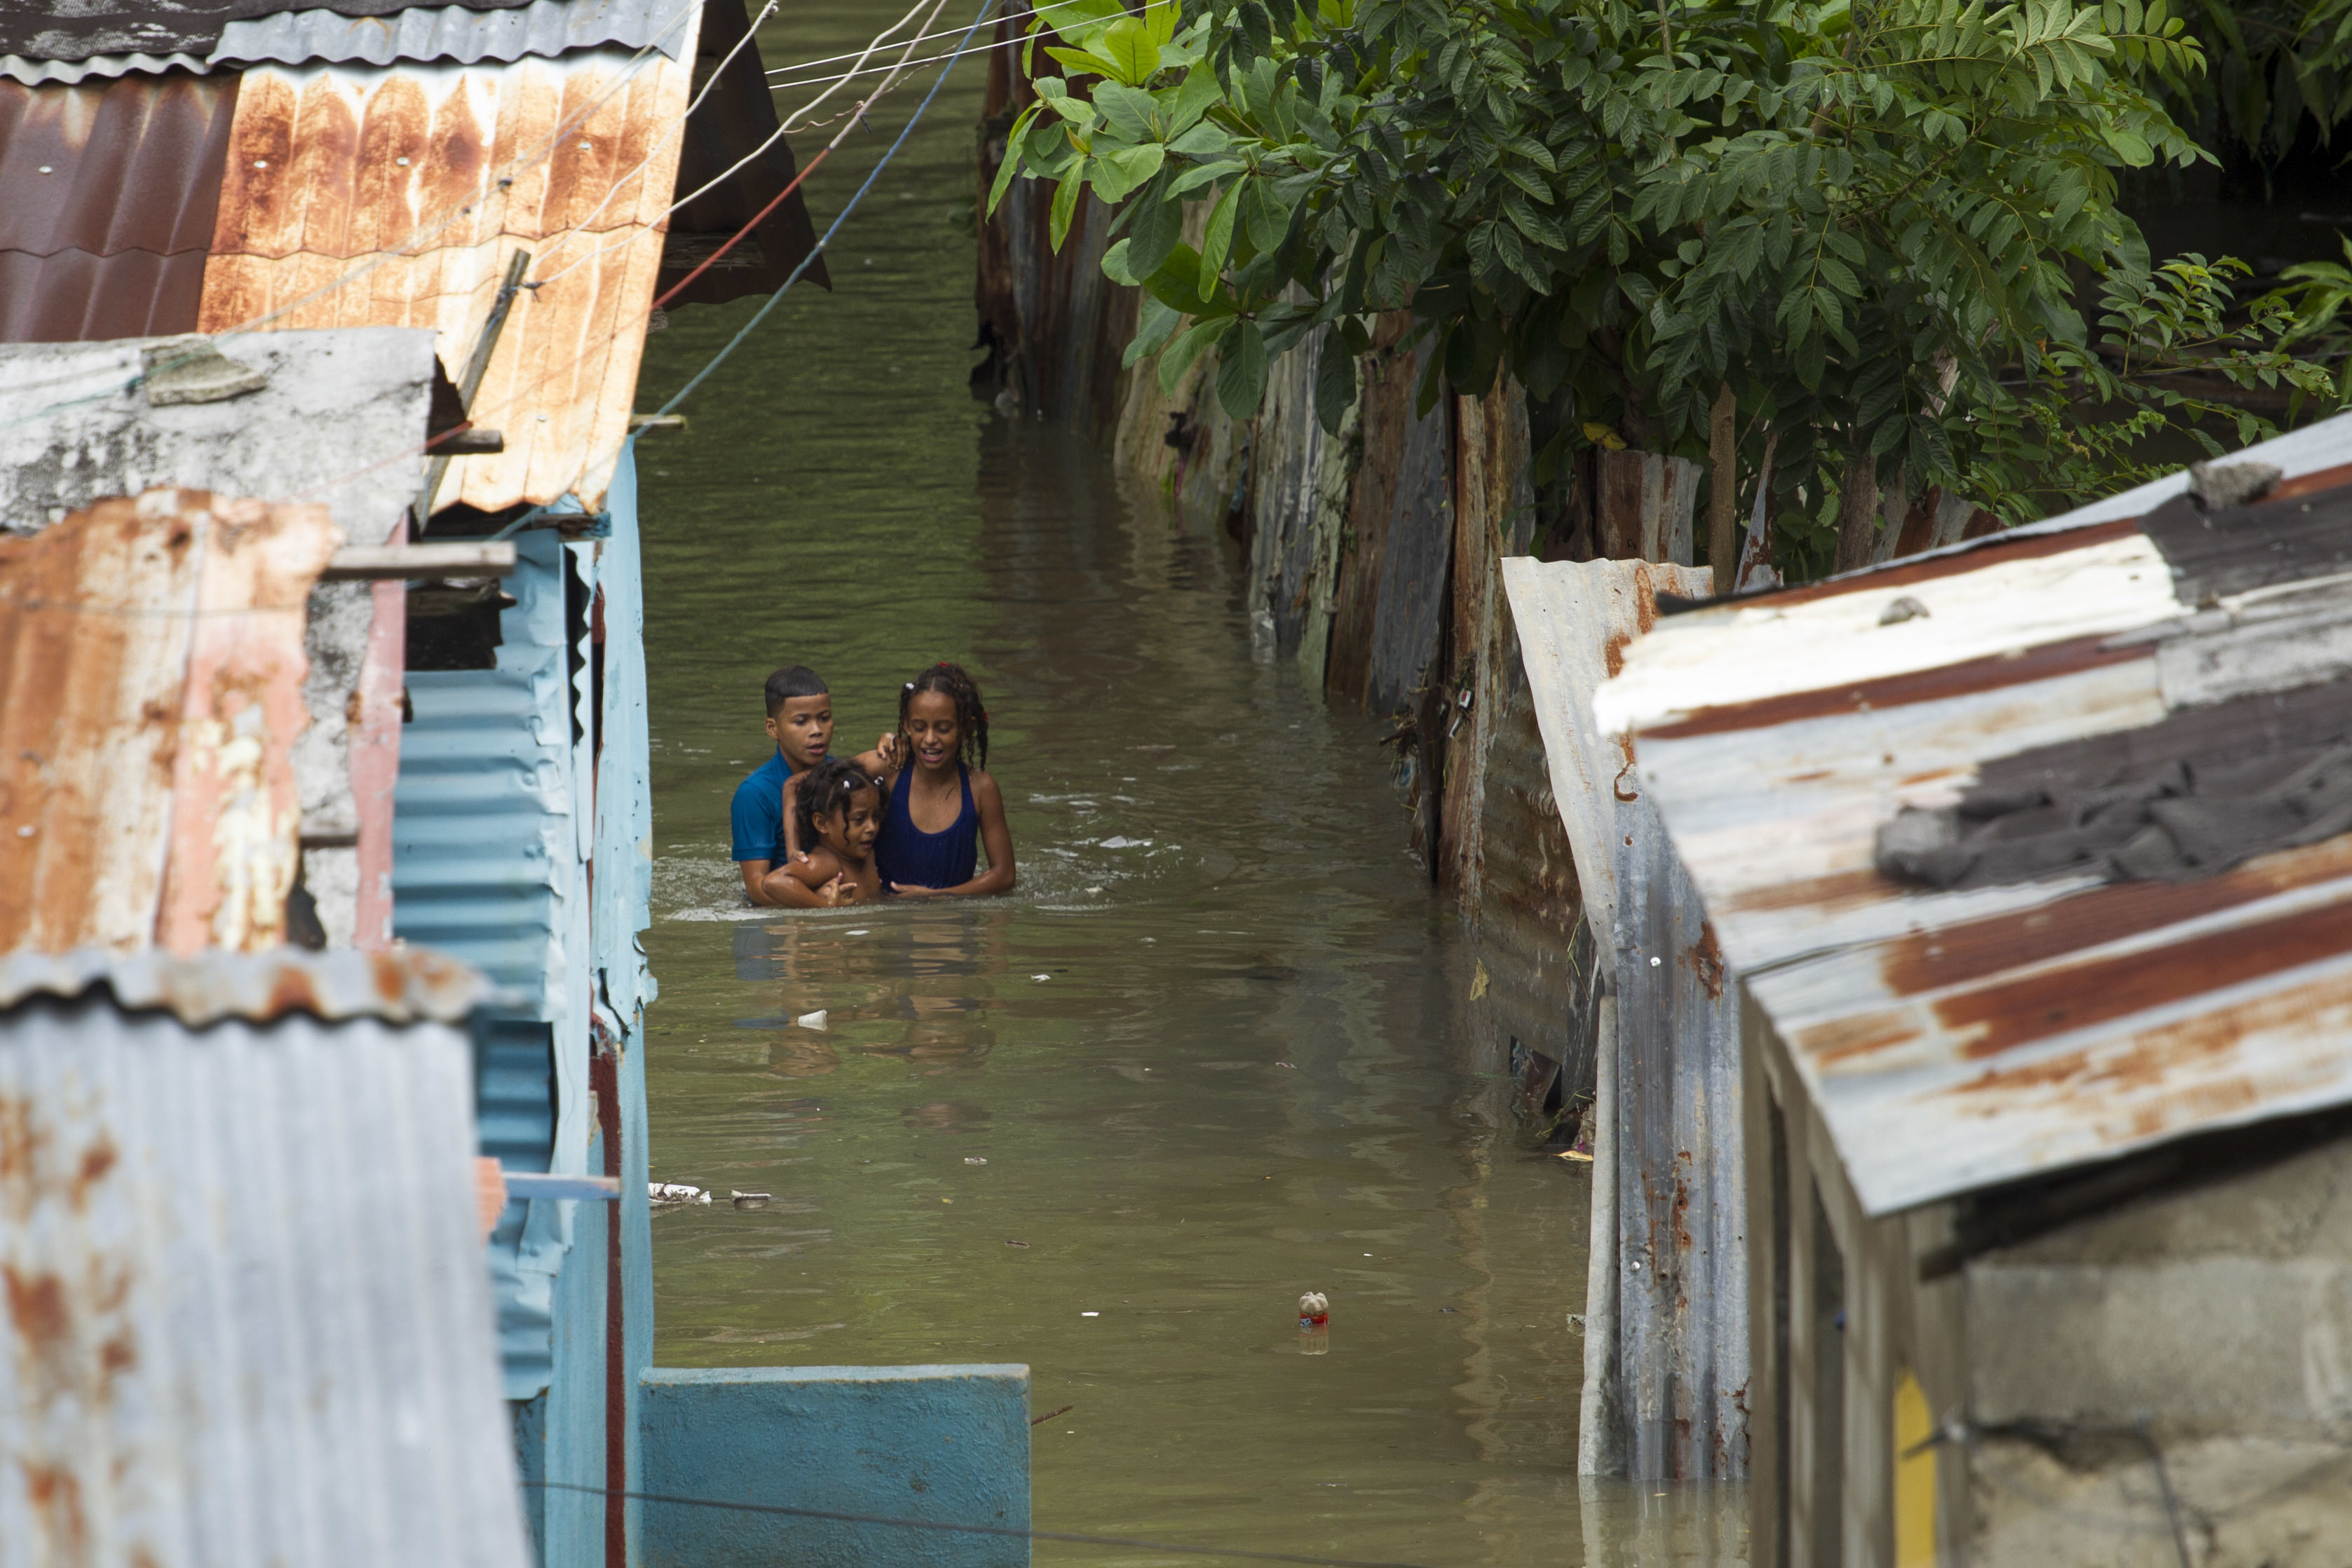 Streets were inundated in a neighborhood in Santo Domingo, Dominican Republic, on Tuesday. Hurricane Matthew dumped rain across the island of Hispaniola, which is split into the Dominican Republic in the east and Haiti to the west. (Photo by Erika Santelices/AFP/Getty Images)